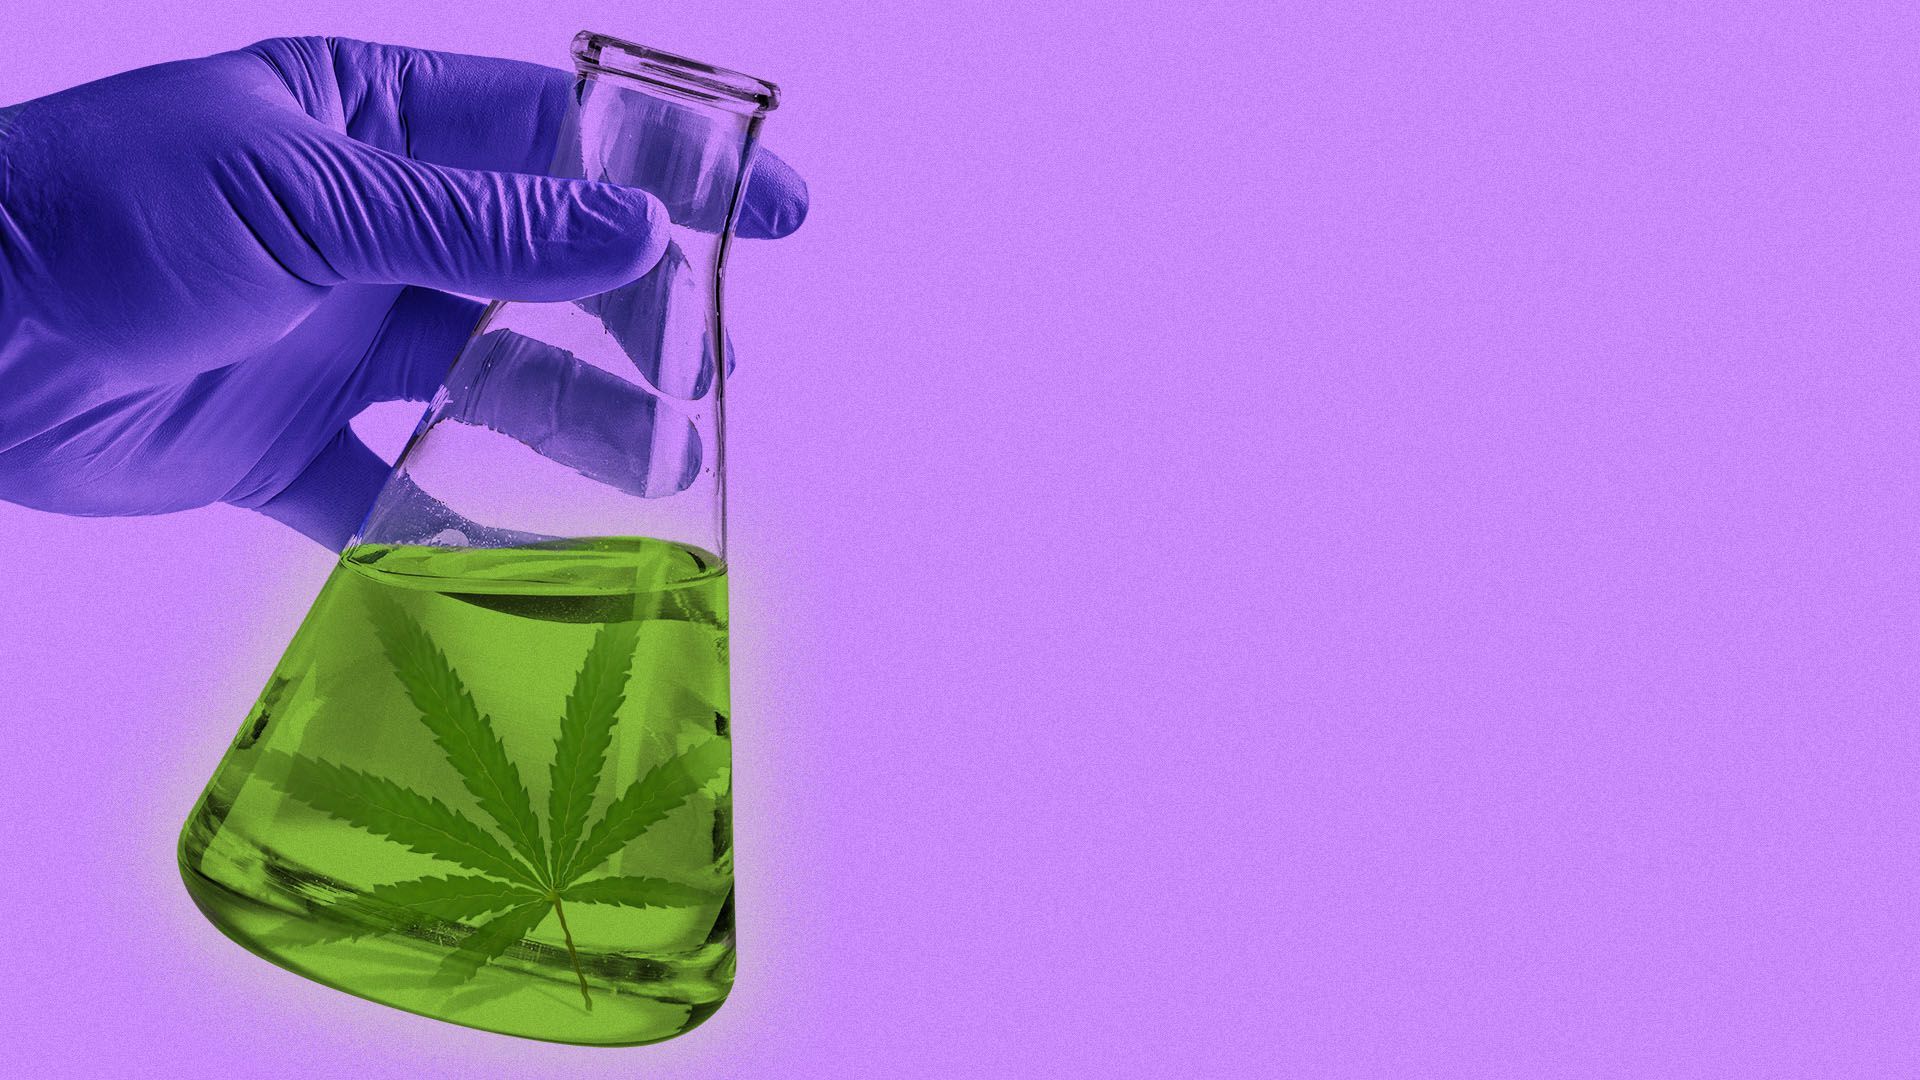 Illustration of a hand holding a beaker with a green liquid and a marijuana leaf inside